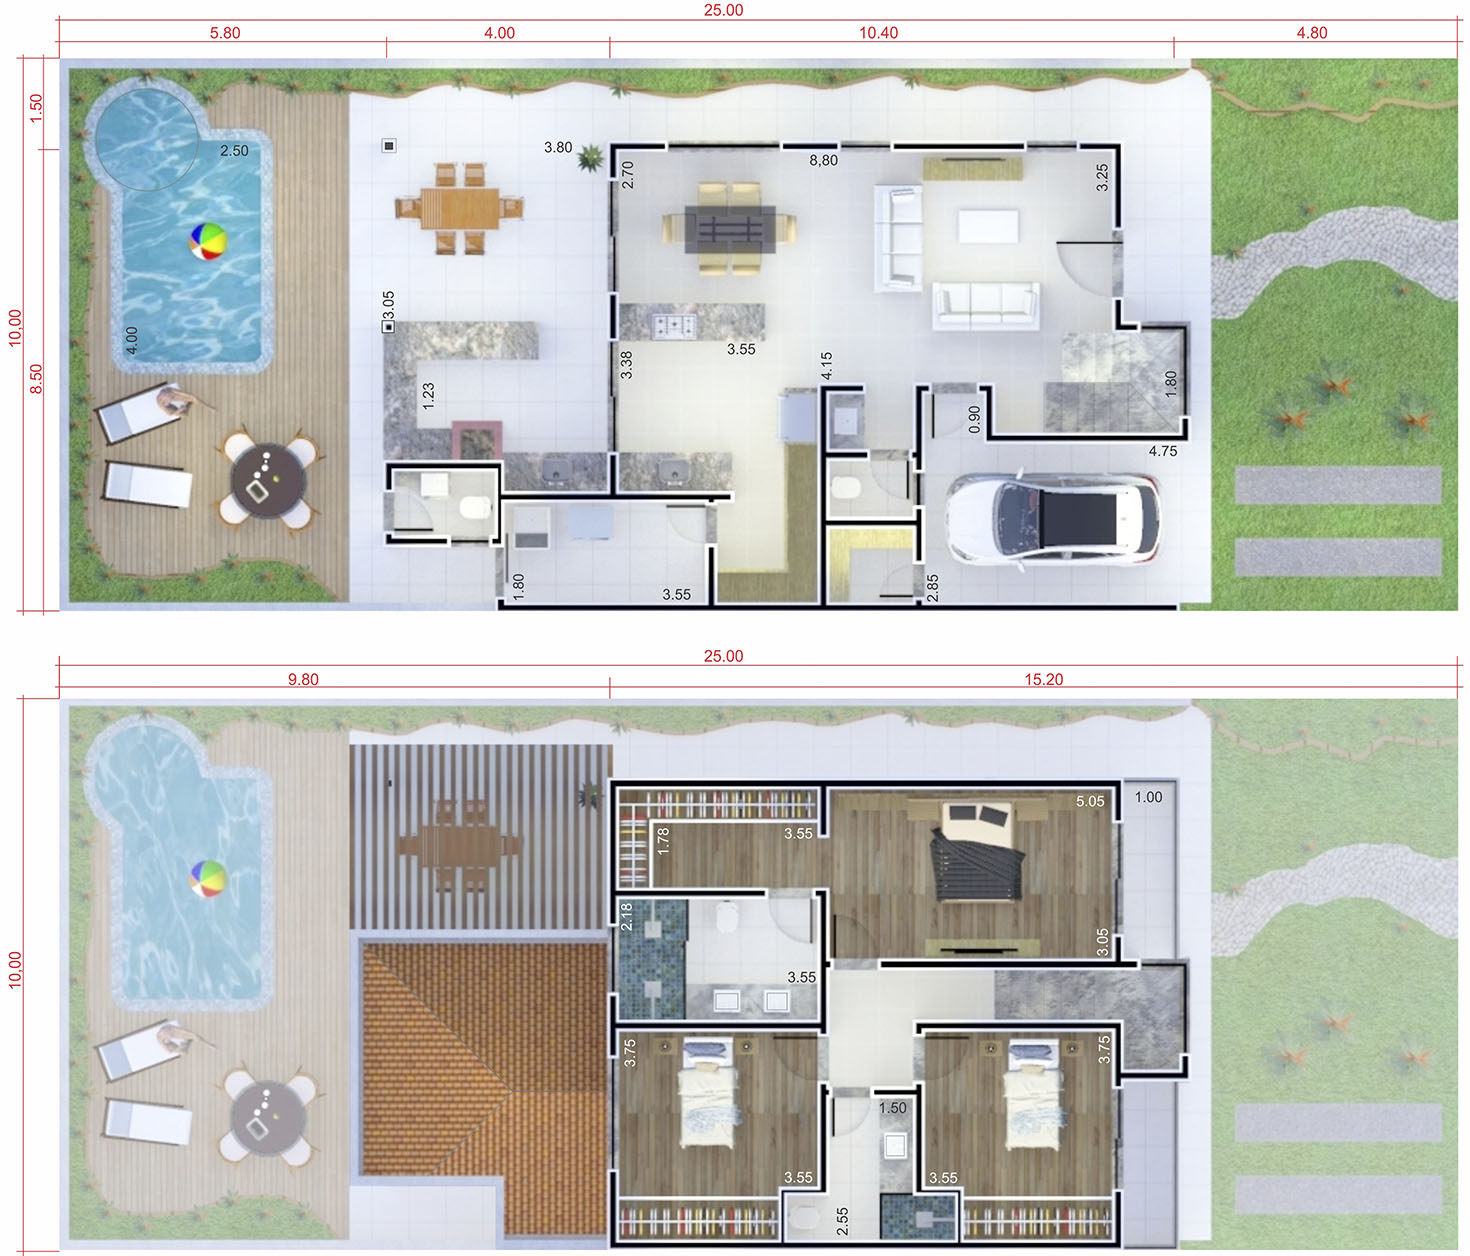 Floor plan with leisure area10x25